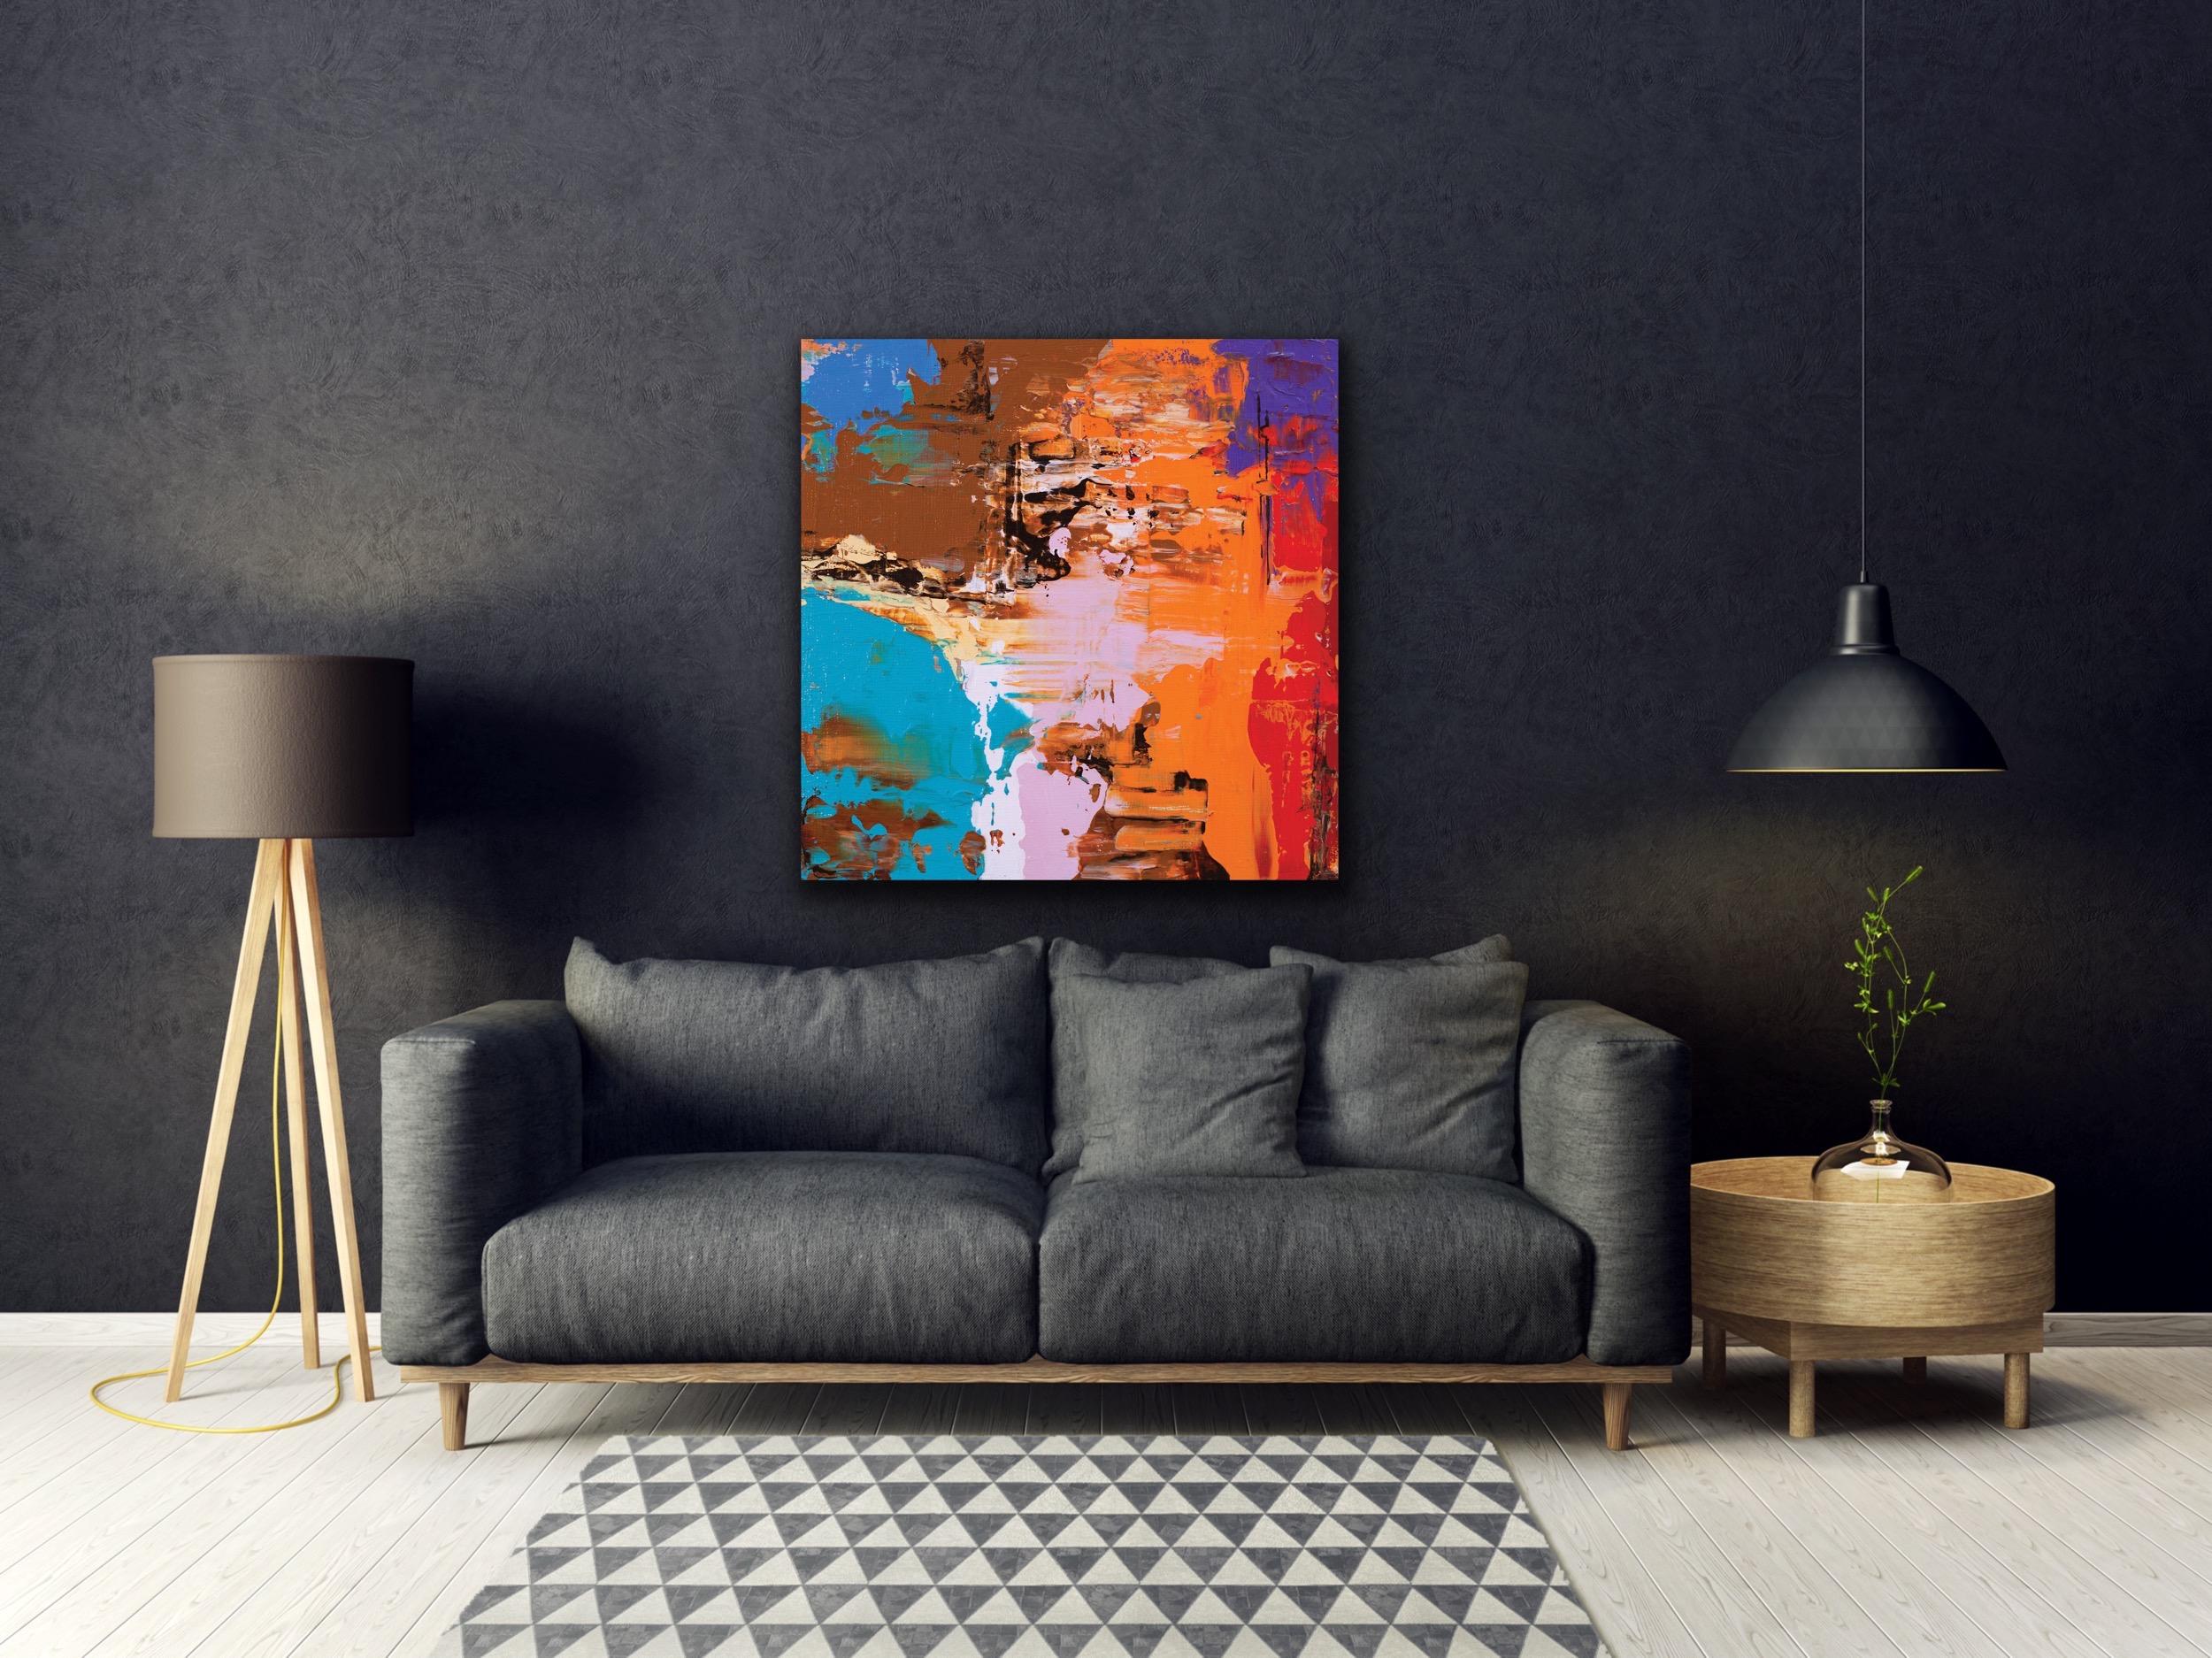 This modern abstract print on lightweight metal composite and is suitable for indoor or outdoor decor. This is a limited edition print of Celeste Reiter's original painting, is signed by the artist. 

-Artist: Celeste Reiter
-Limited Edition -